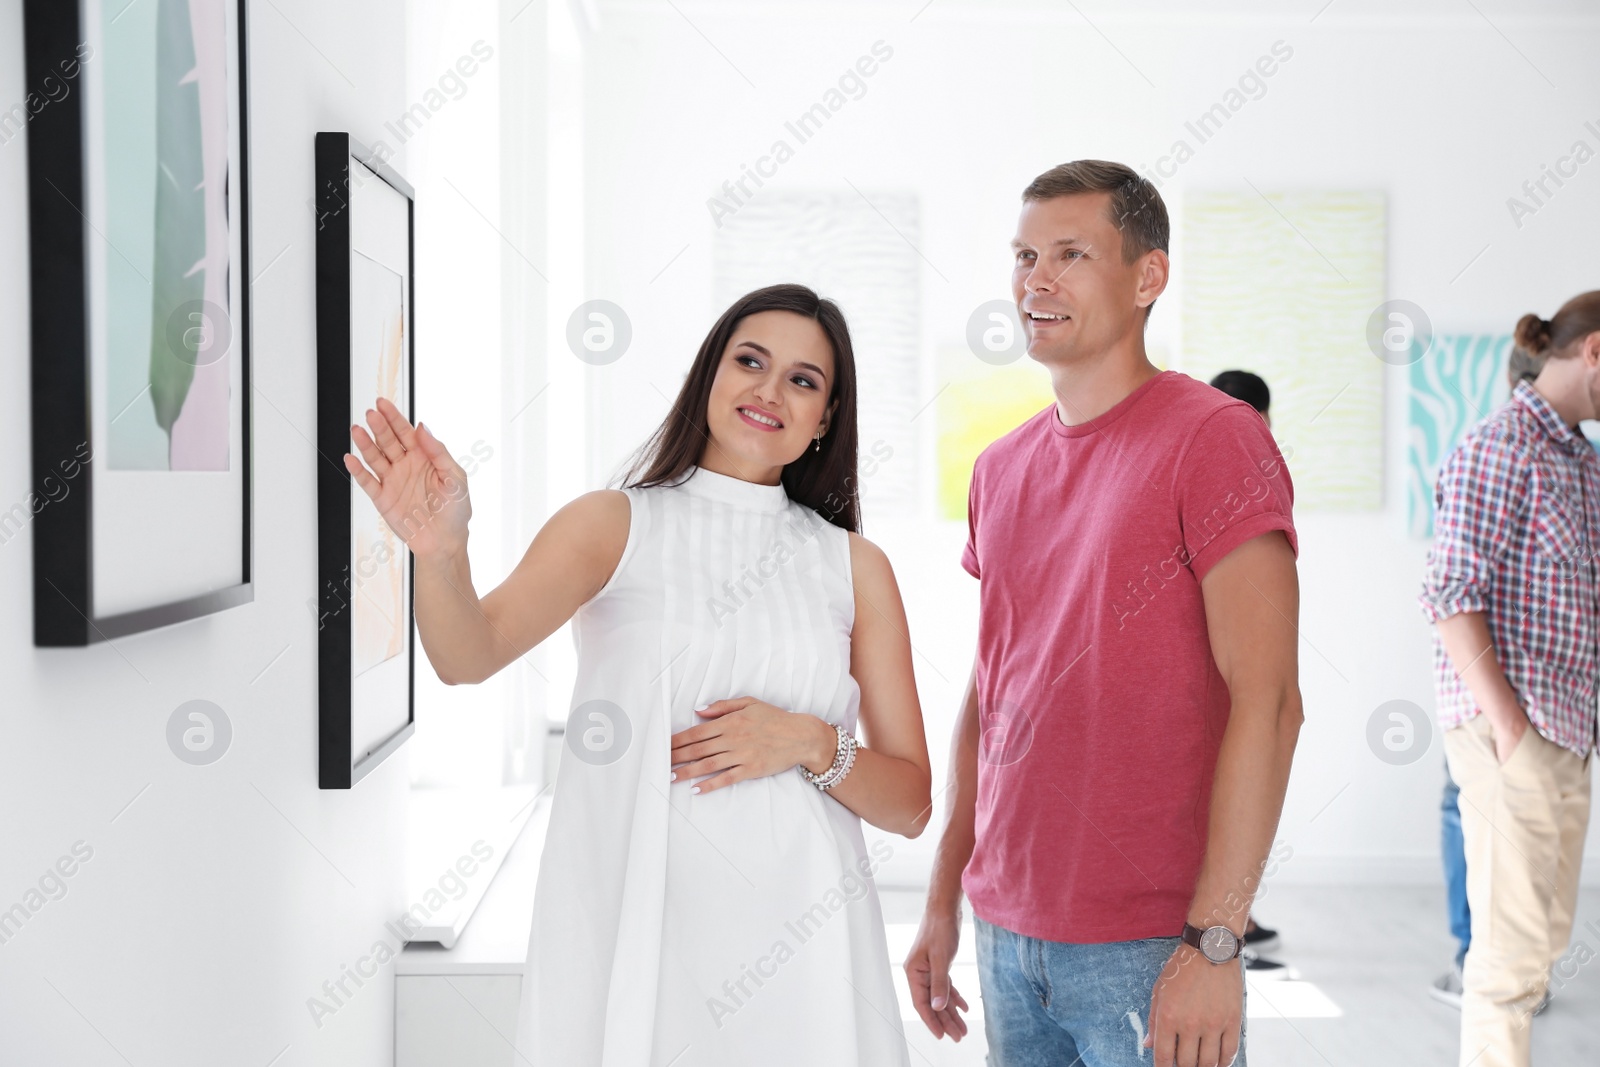 Photo of Young couple at exhibition in art gallery